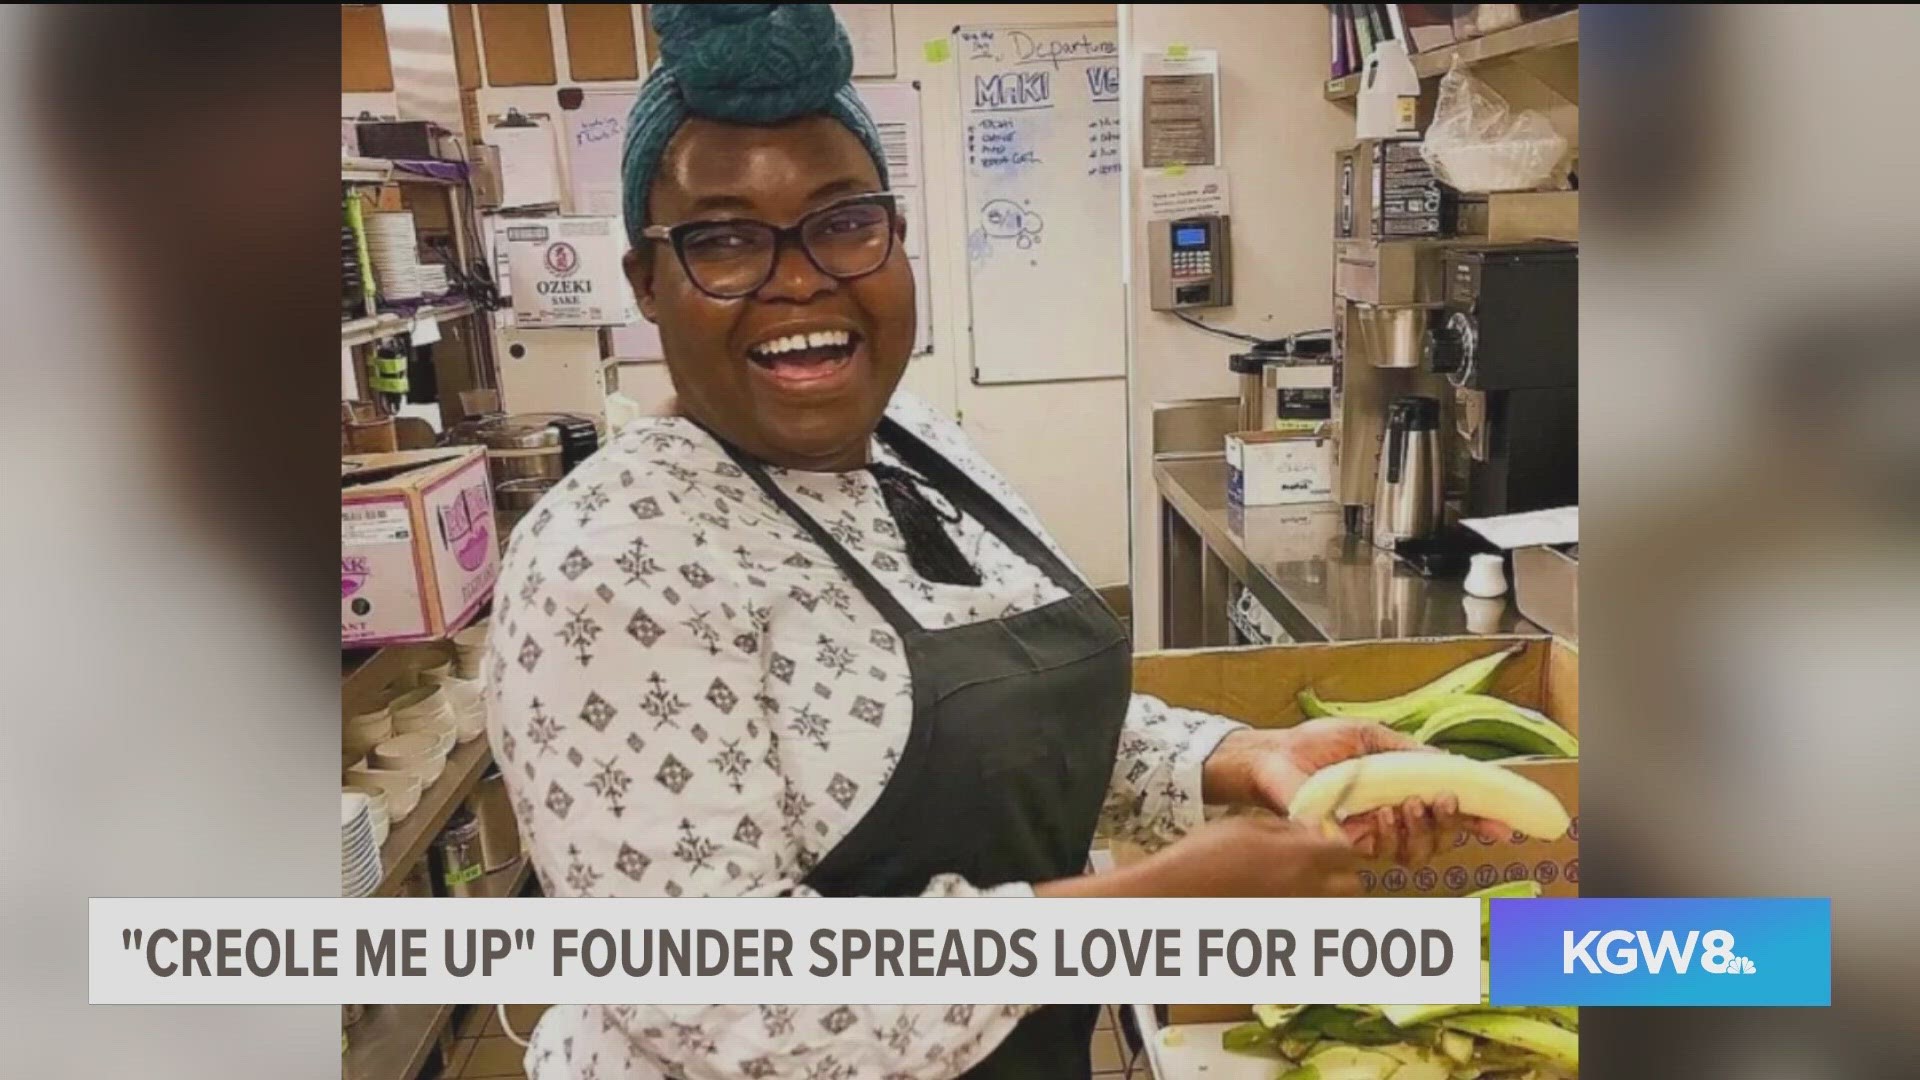 The Haitian business owner overcame hardships of homelessness, health, finances and more to now having her products sold in over 10 different stores across Oregon.